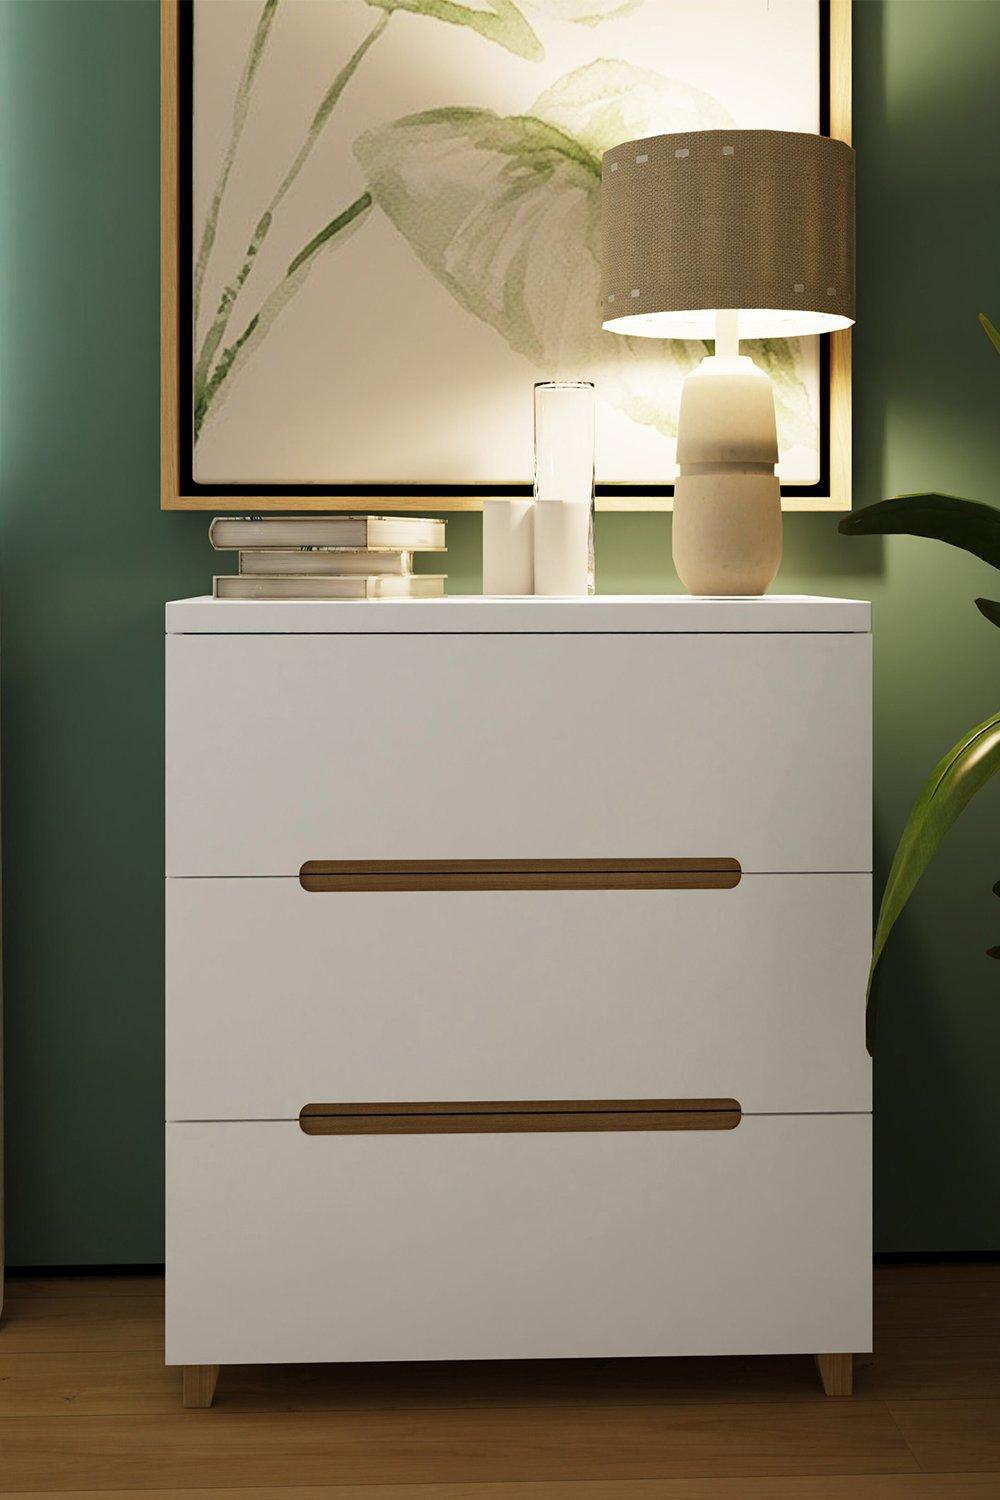 Veloce 3 Drawer White Gloss Bedside Fast Click Assembly